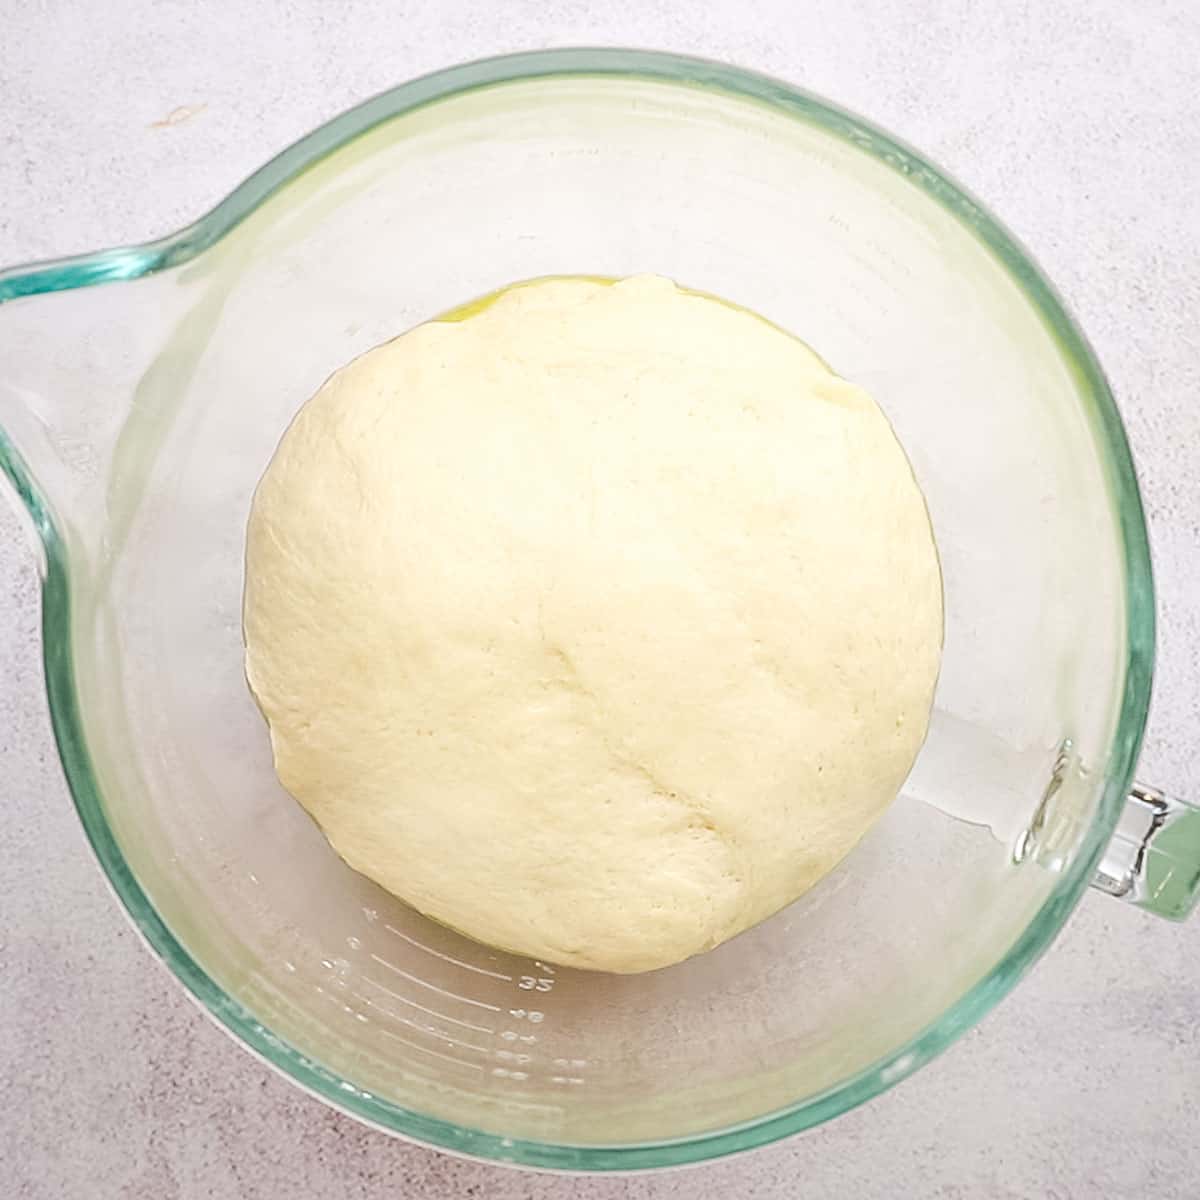 A risen ball of pizza dough in a mixing bowl.